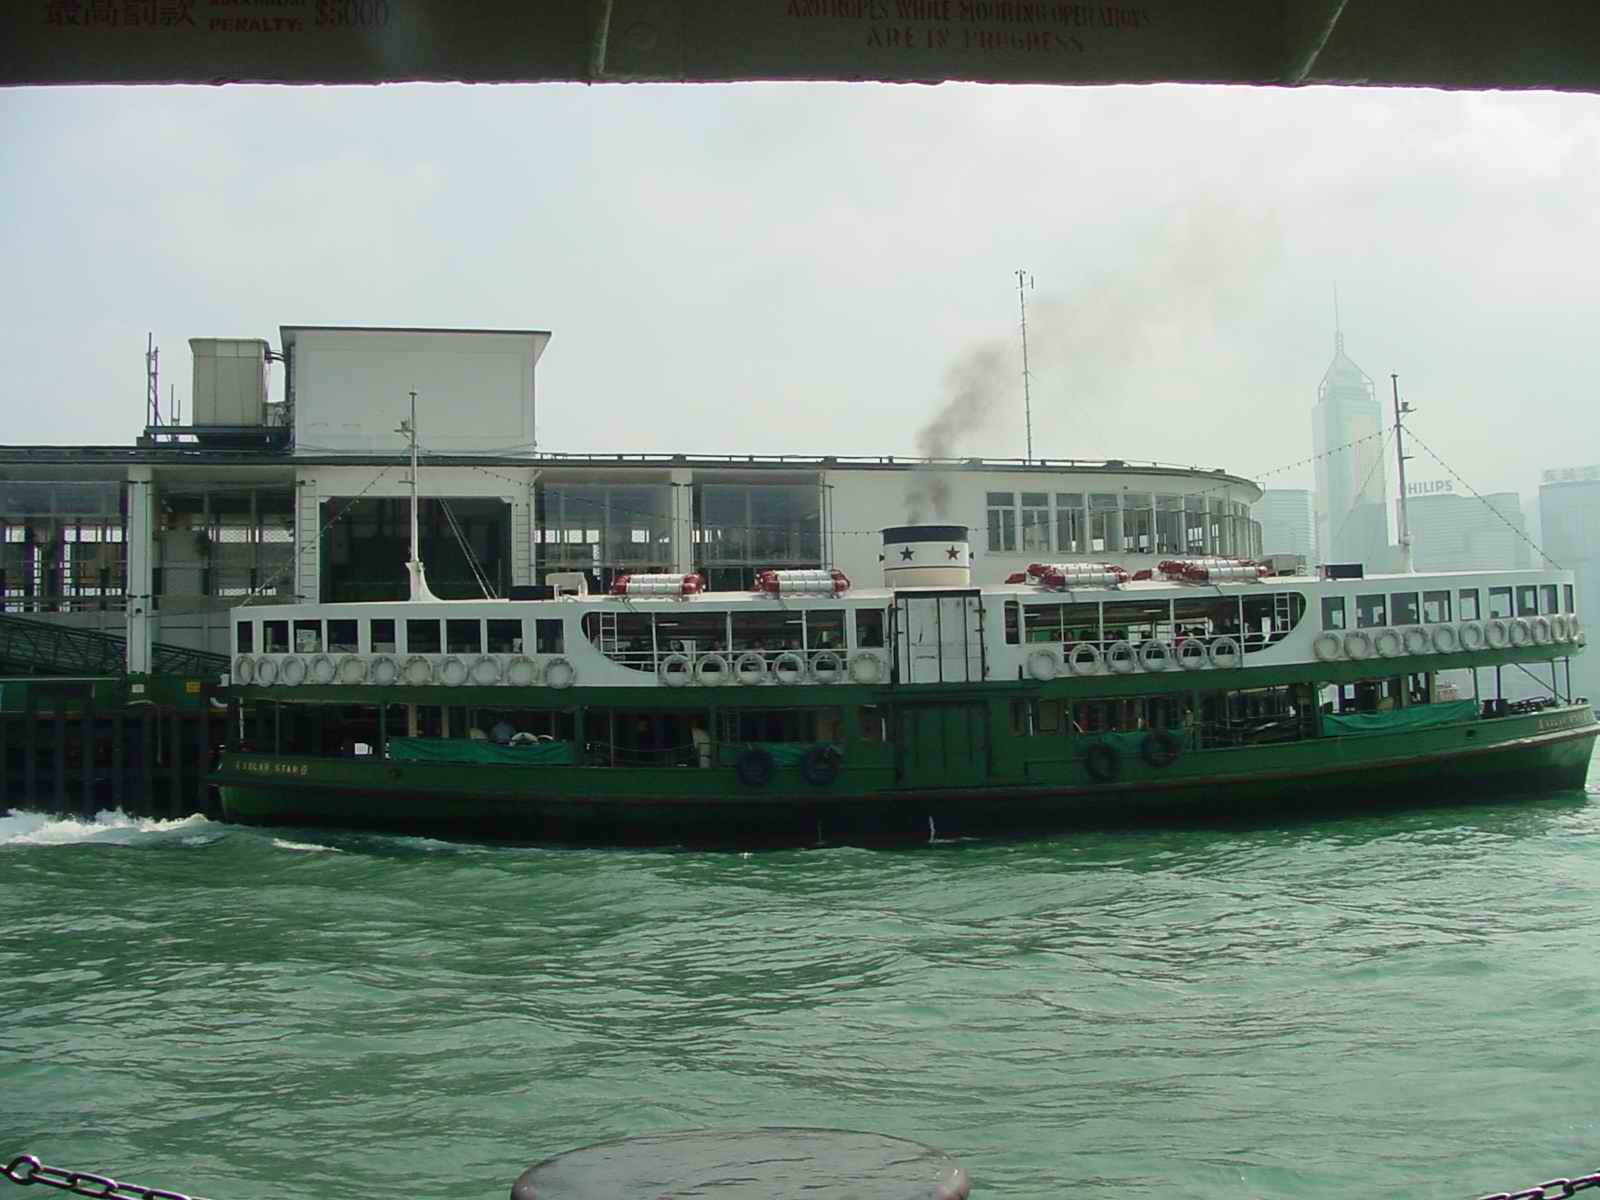 HK Harbour from Star Ferry